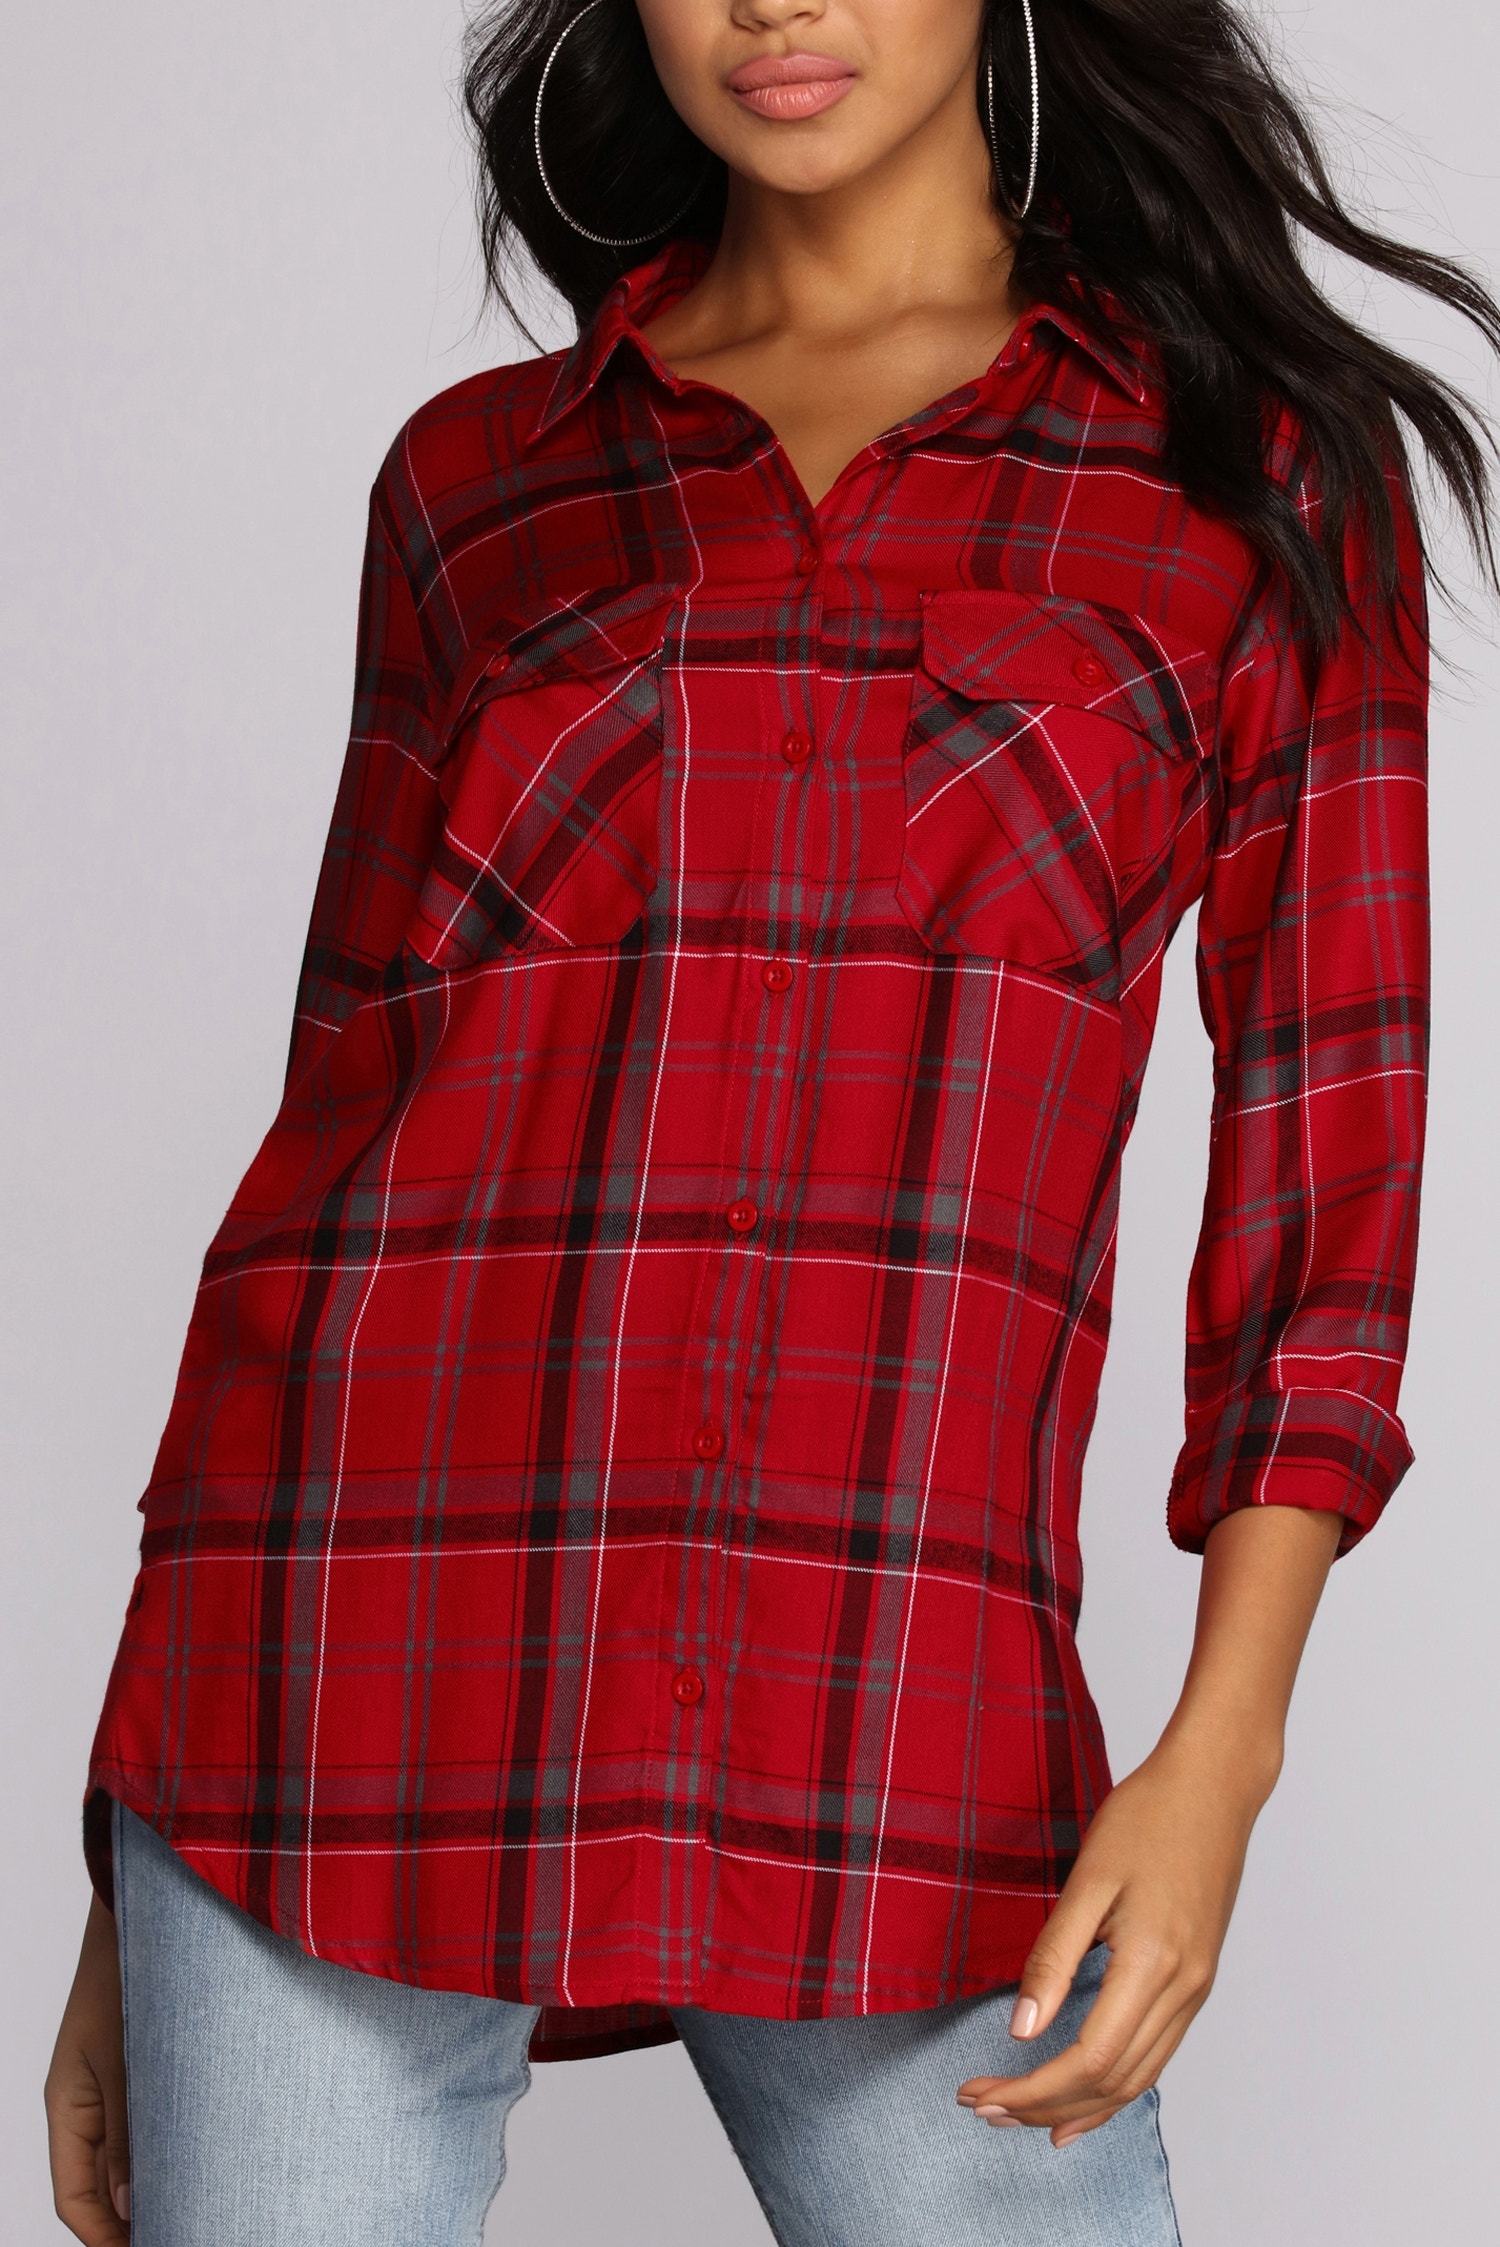 Perfectly Plaid Button Up Top